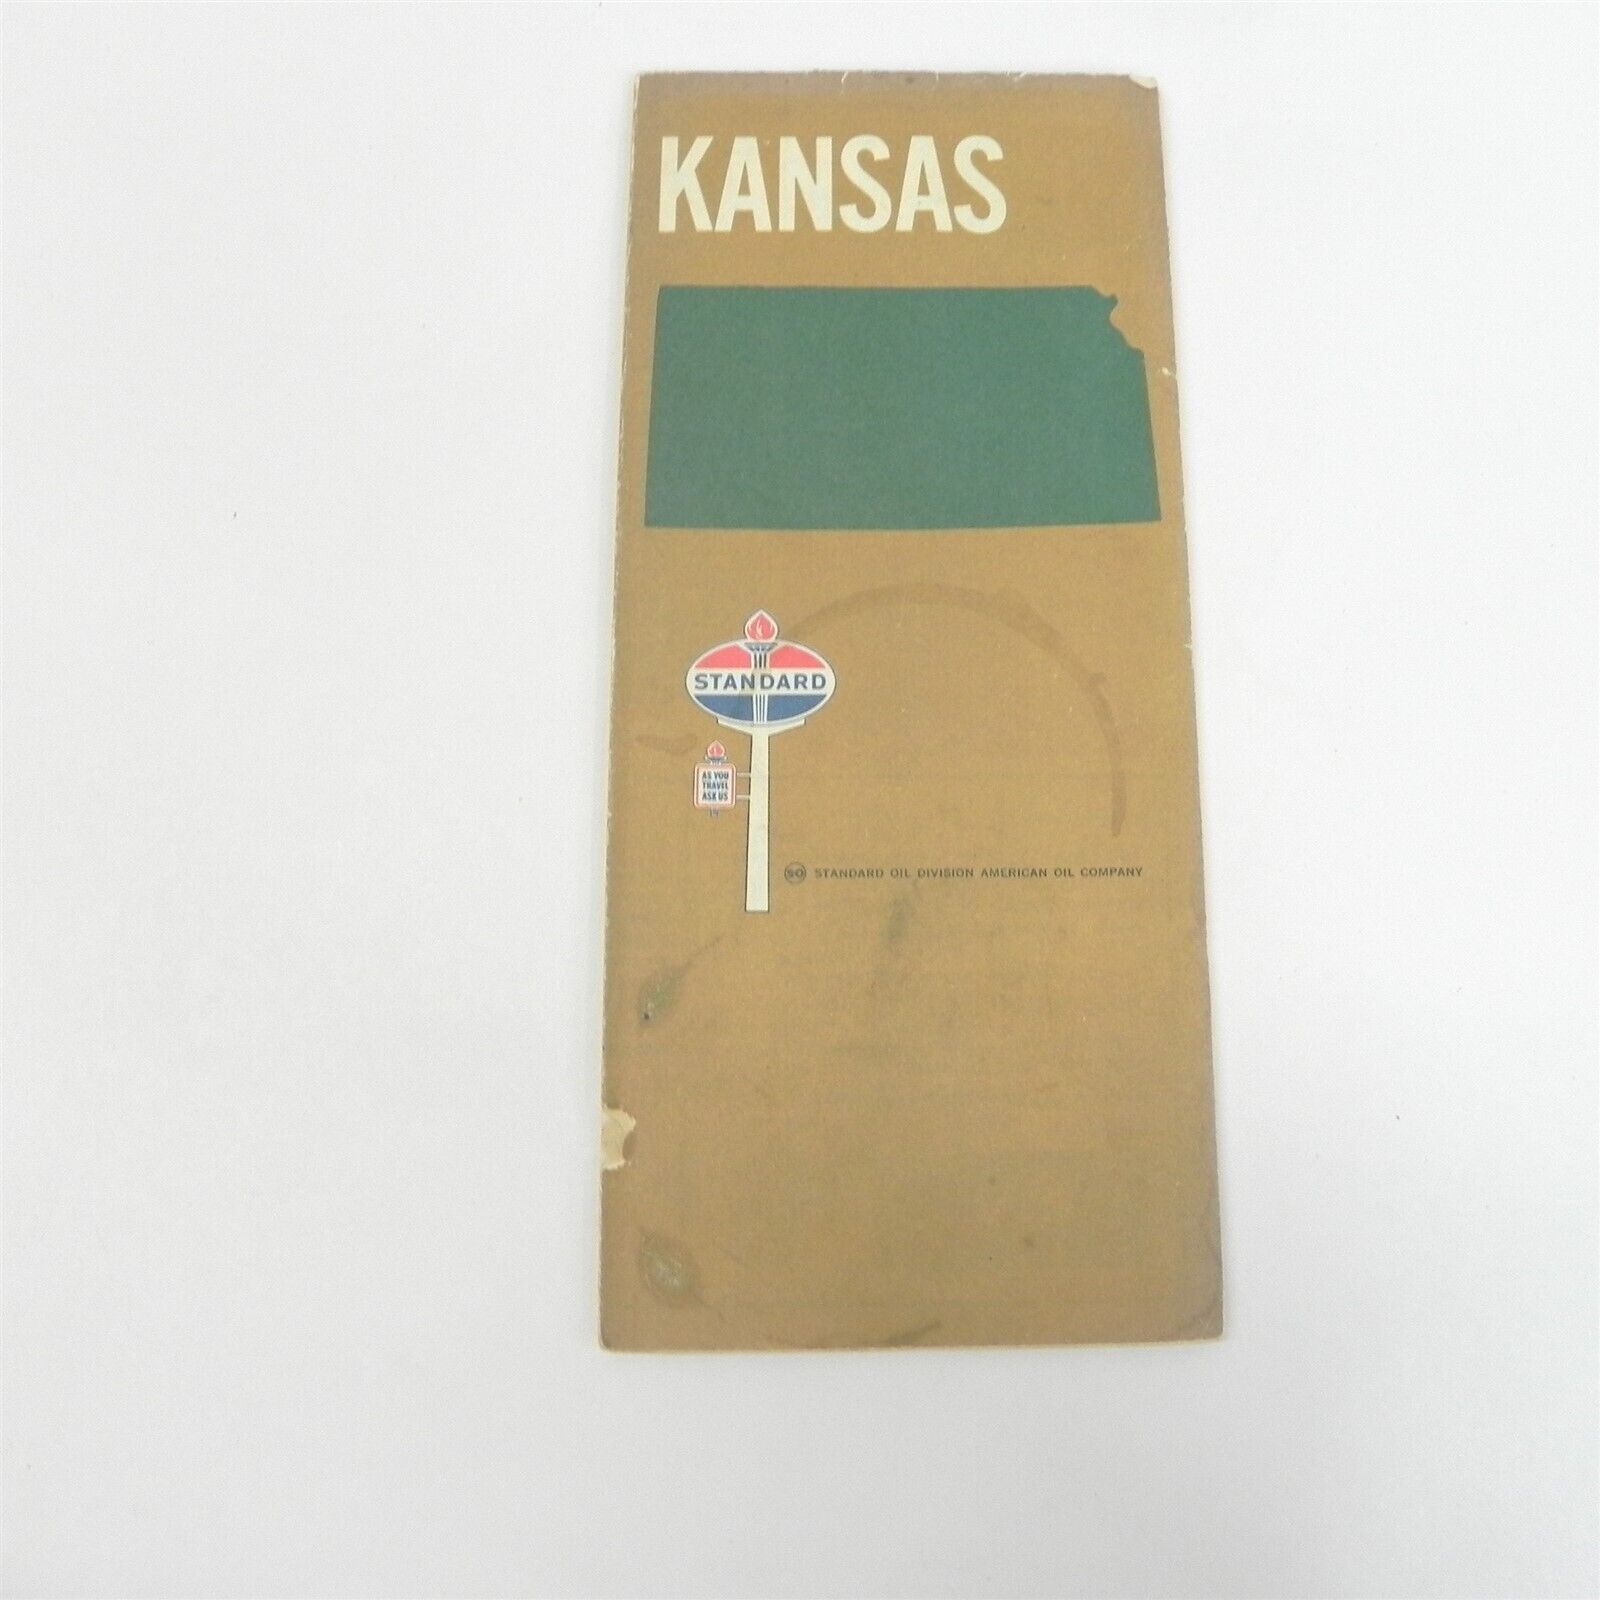 VINTAGE 1970 STANDARD GAS OIL COMPANY TOURING ROAD MAP OF KANSAS 18 X 25